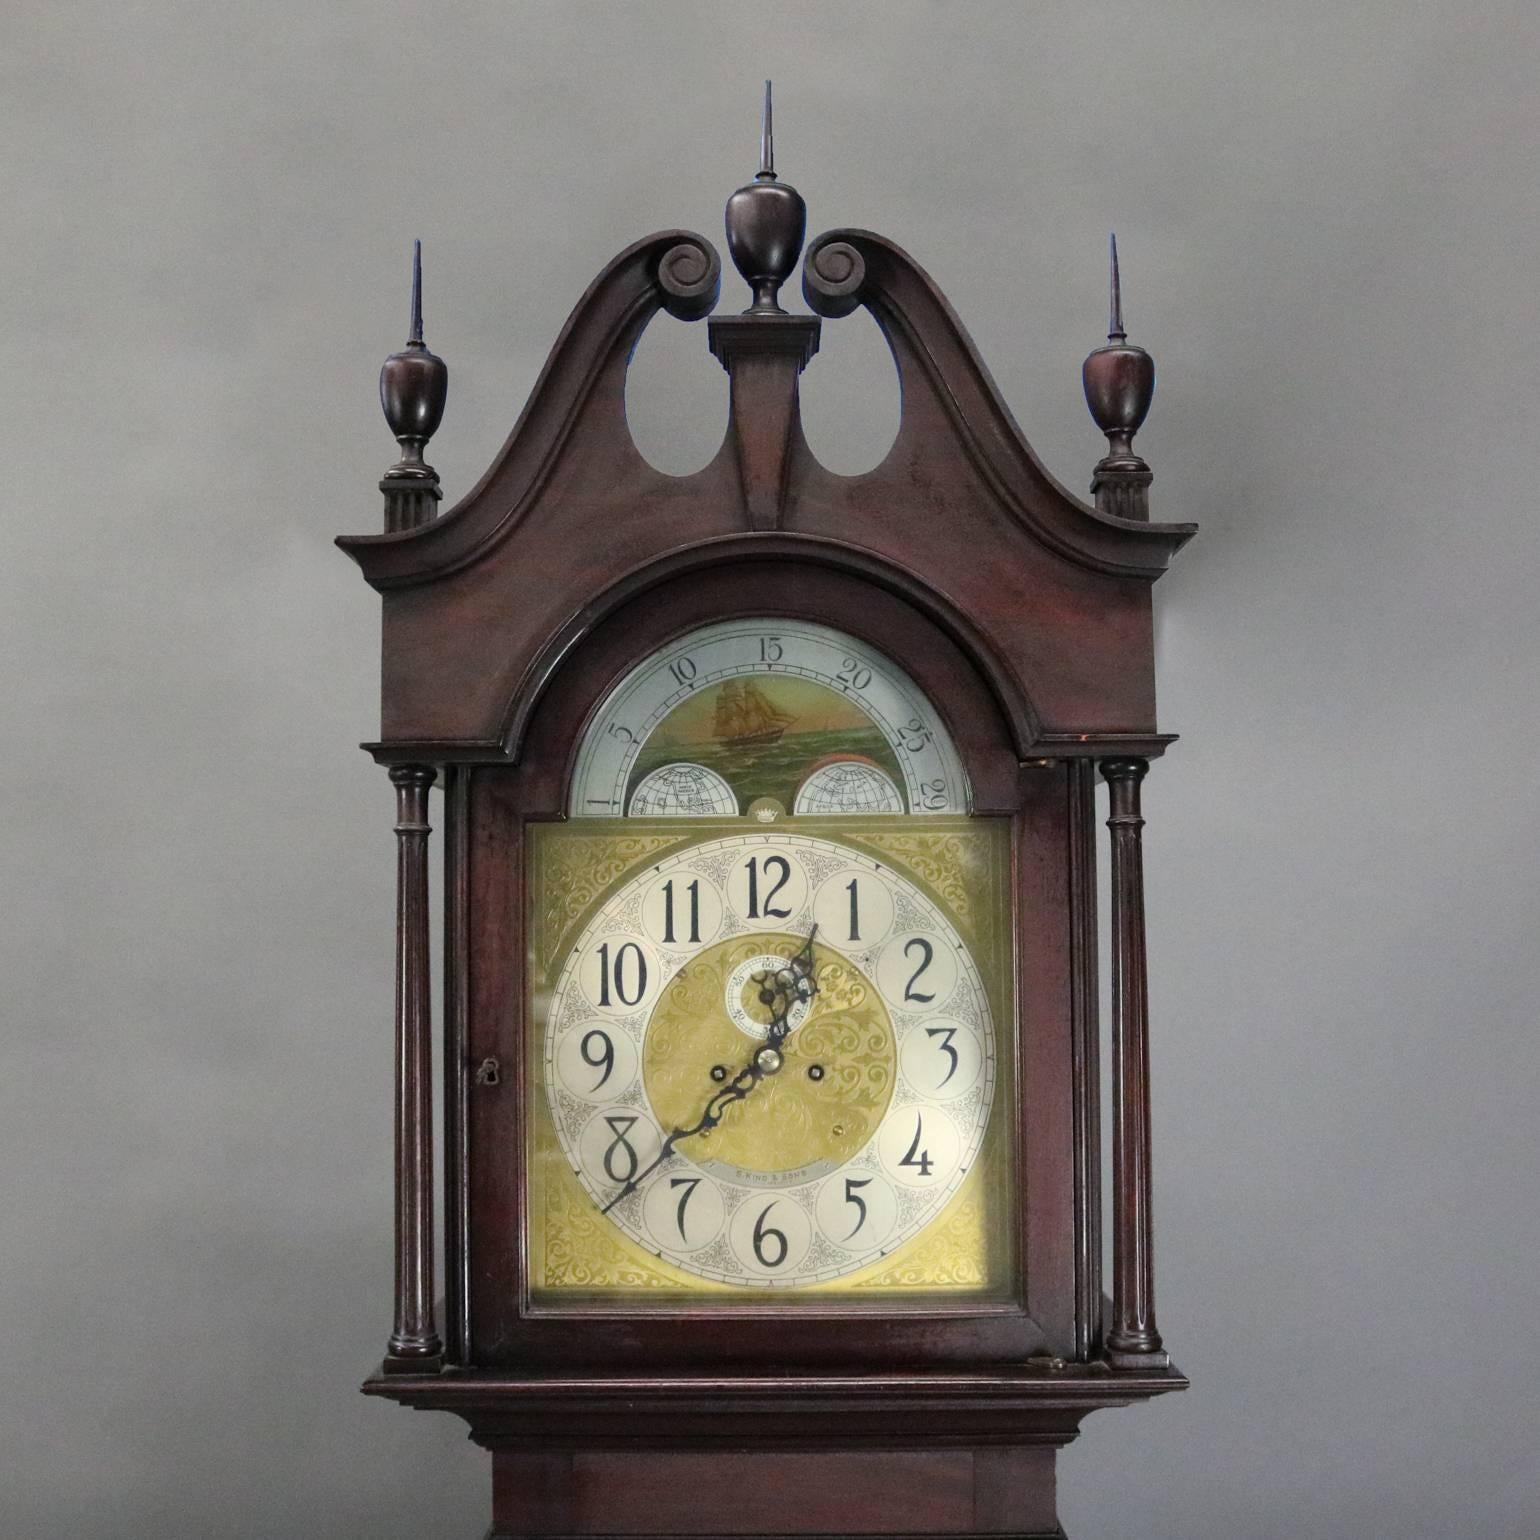 Antique Herschede tall case clock features cherry case with finial flanked broken arch pediment, moon phase dial decorated with tall mast ship and signed S. Kind & Sons Philadelphia, works signed Herschede, clock in working condition, circa